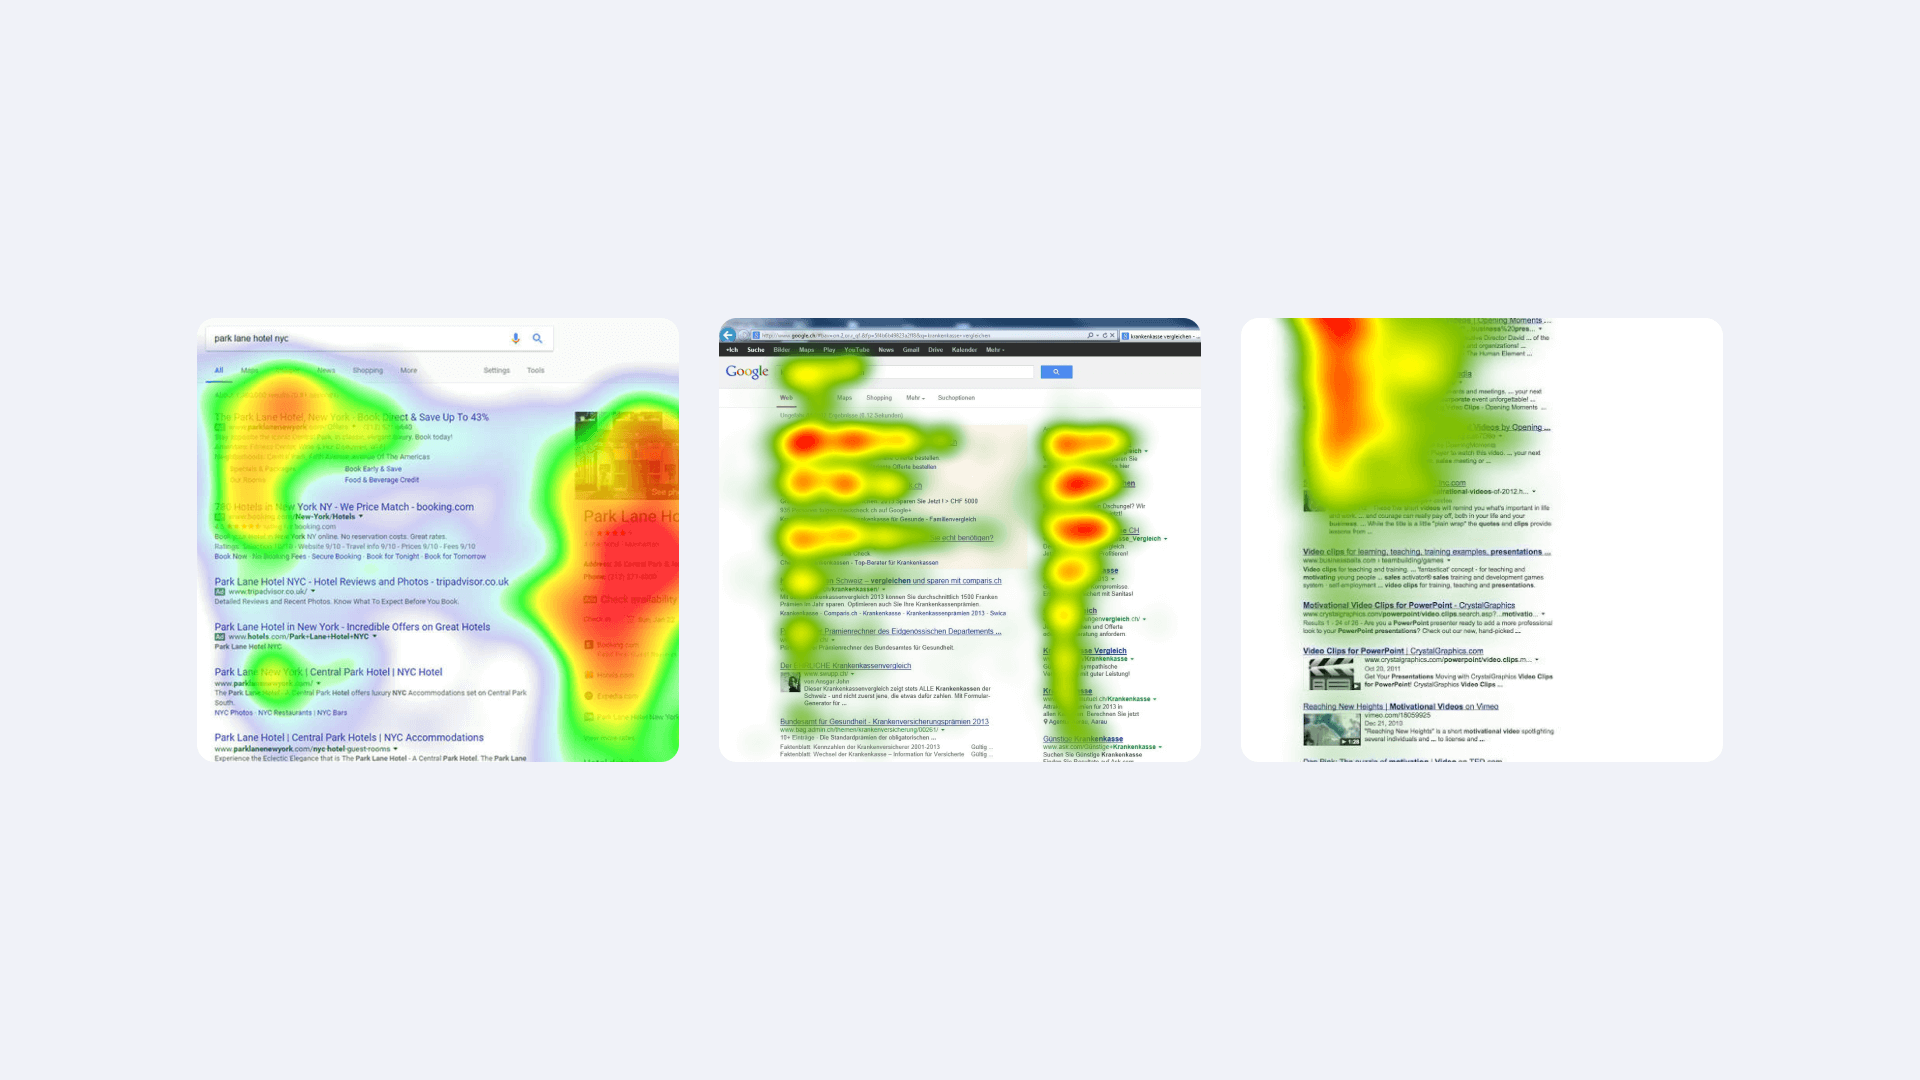 F shaped pattern of scanning a website